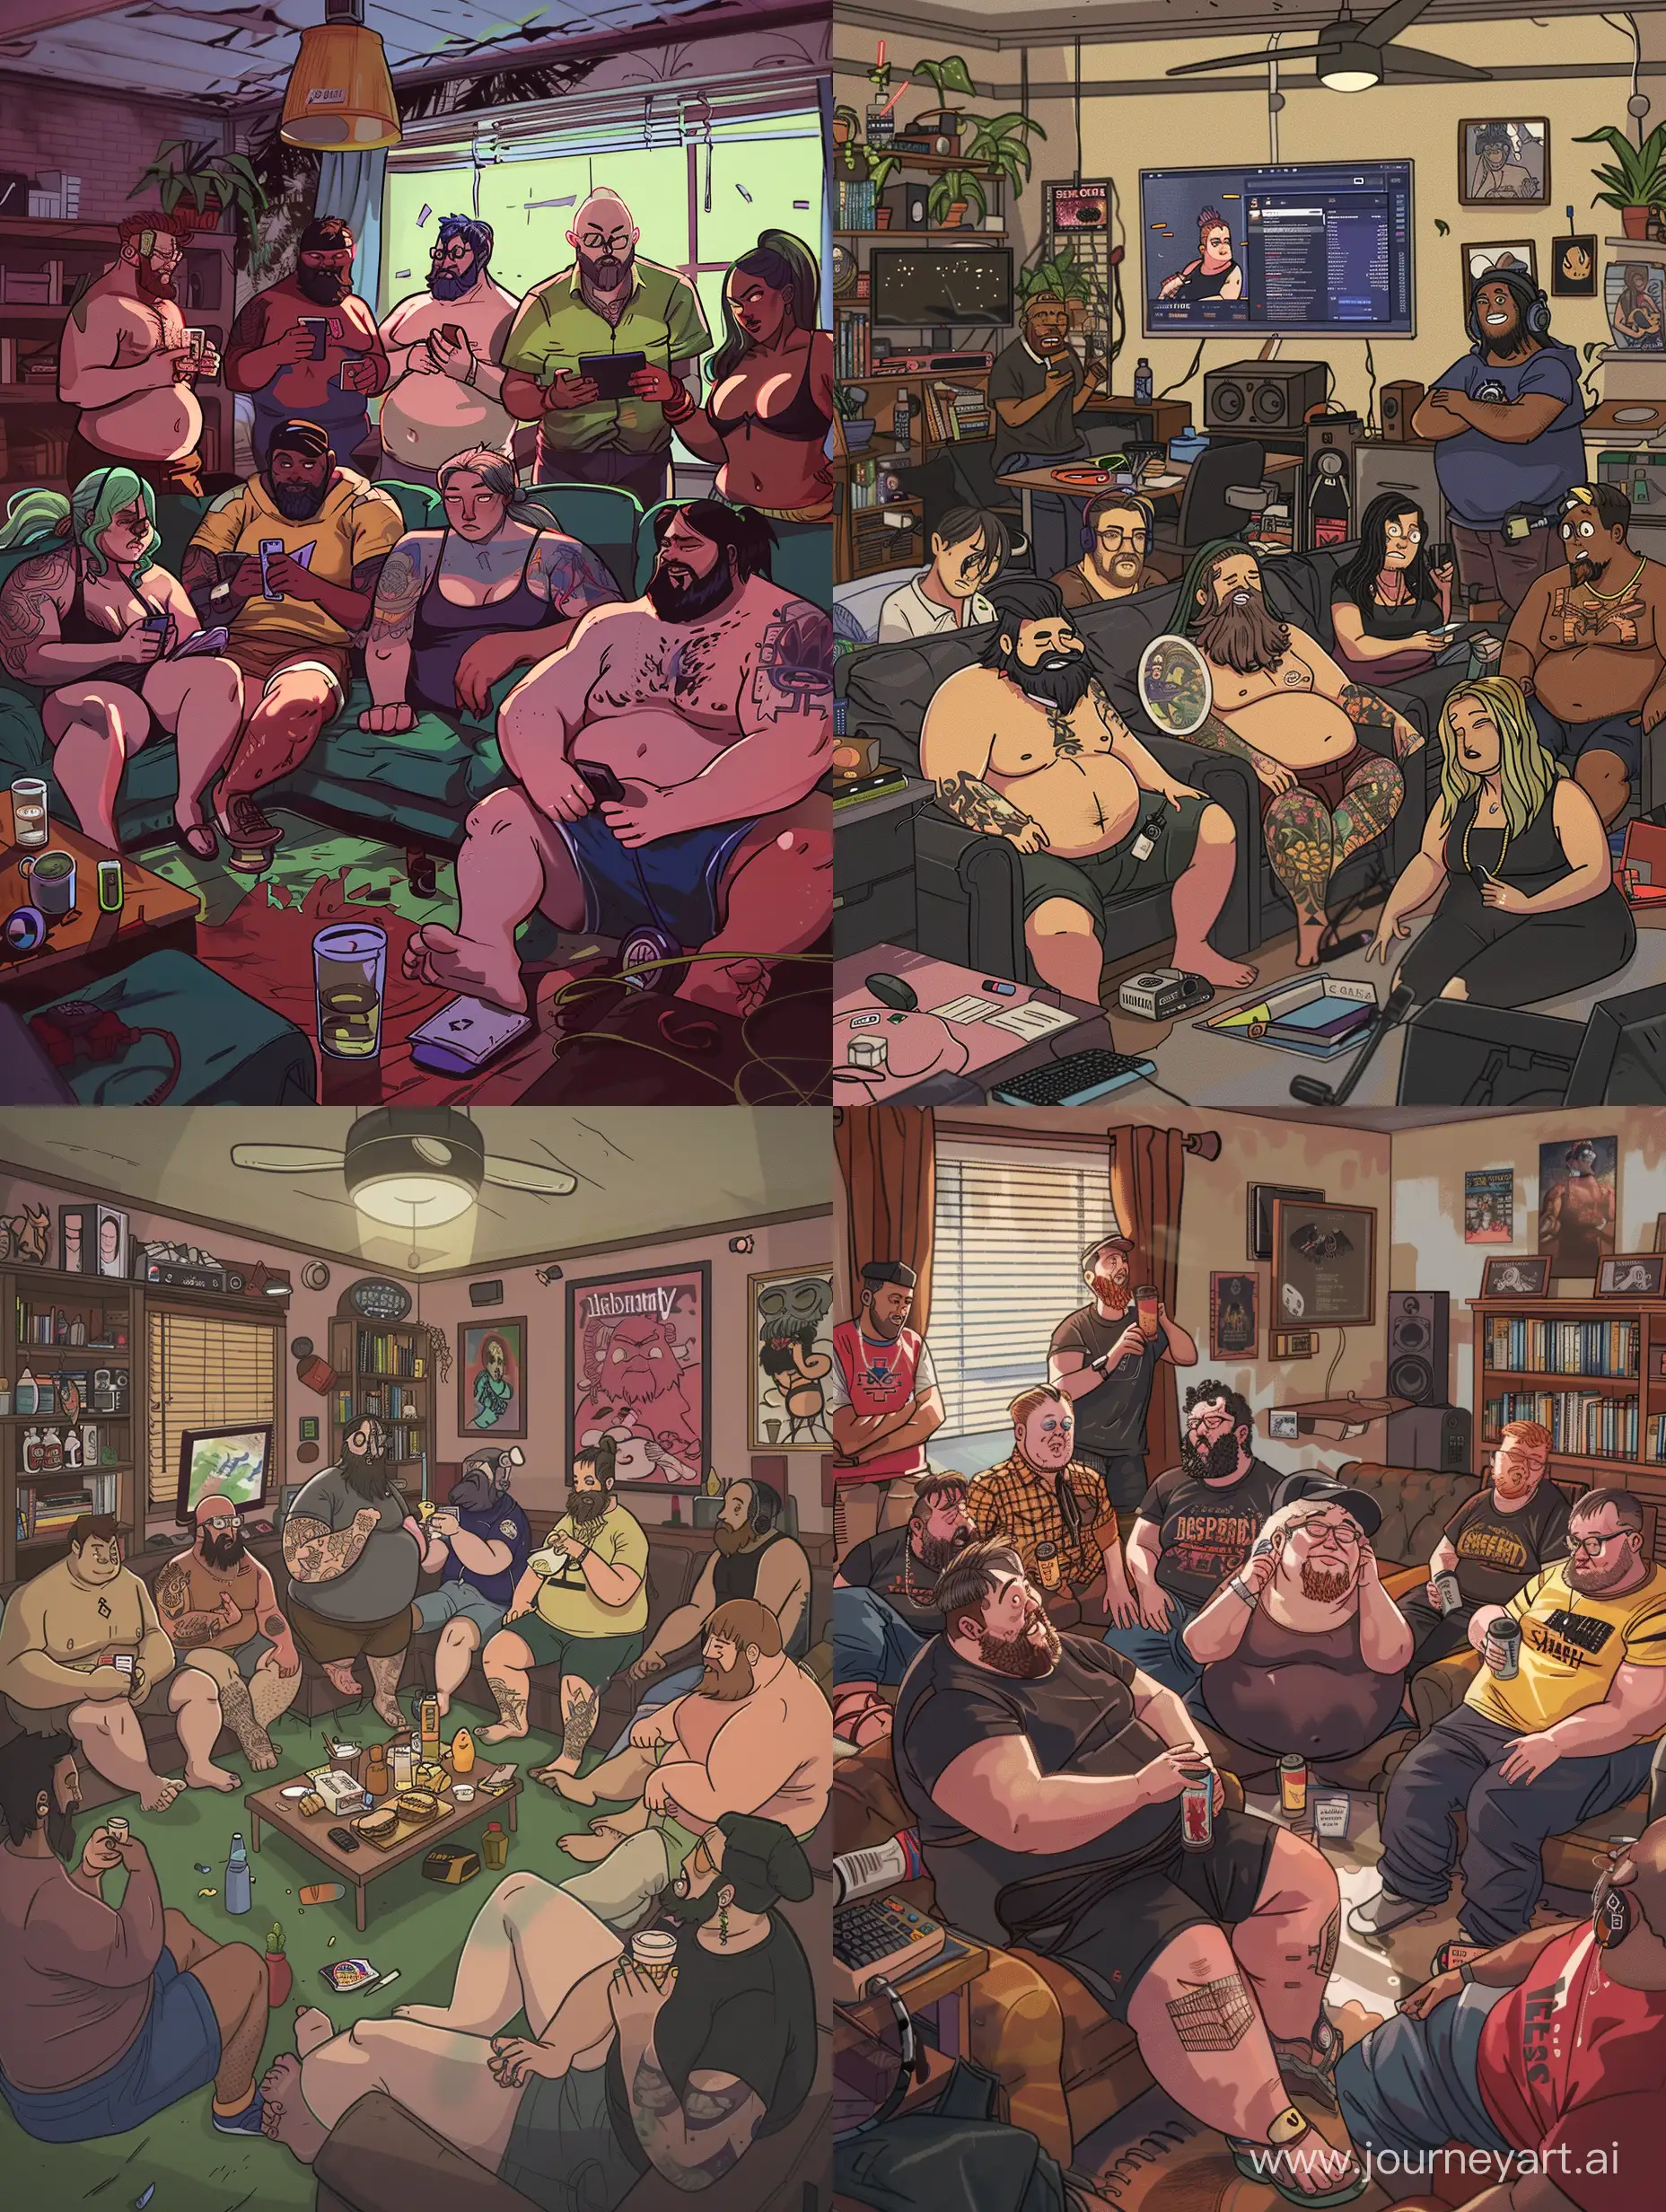 A discord admin meeting in the living room all people are fat and in a disgusting living room 